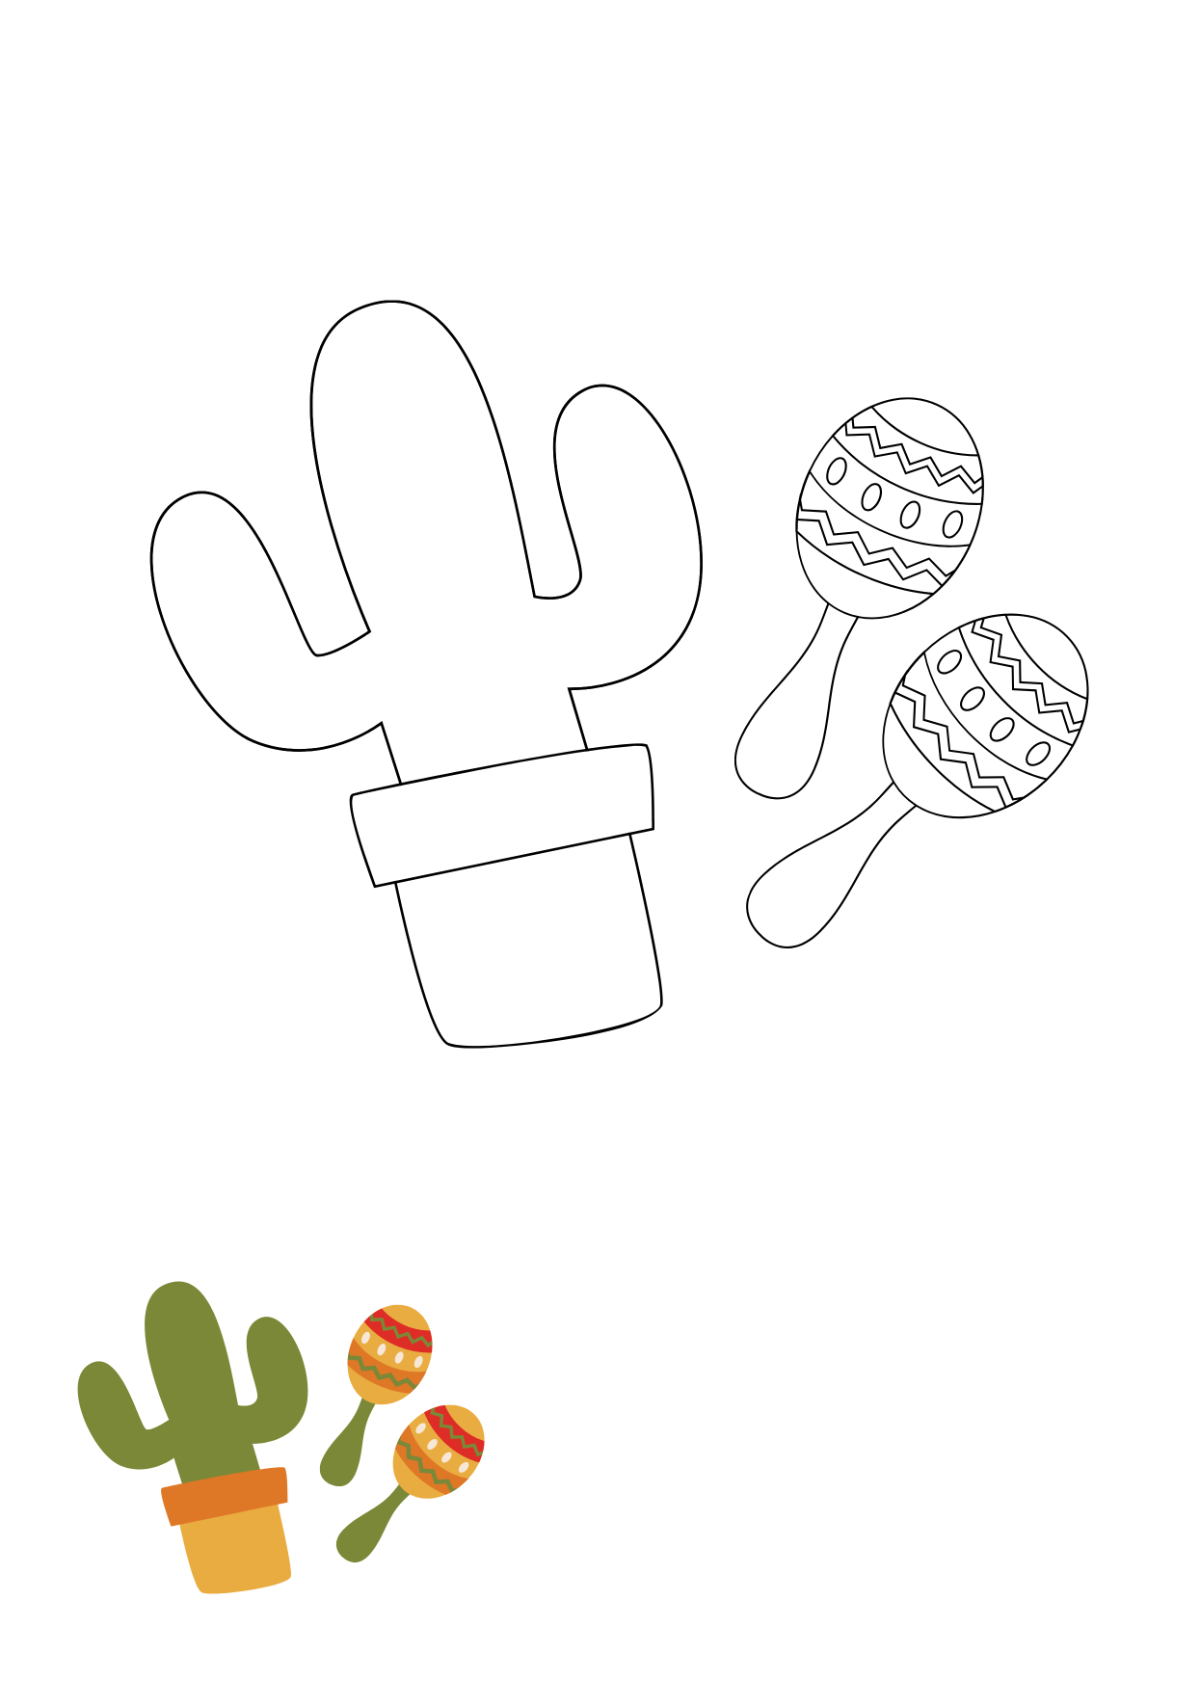 Cinco De Mayo Coloring Page for kids Template